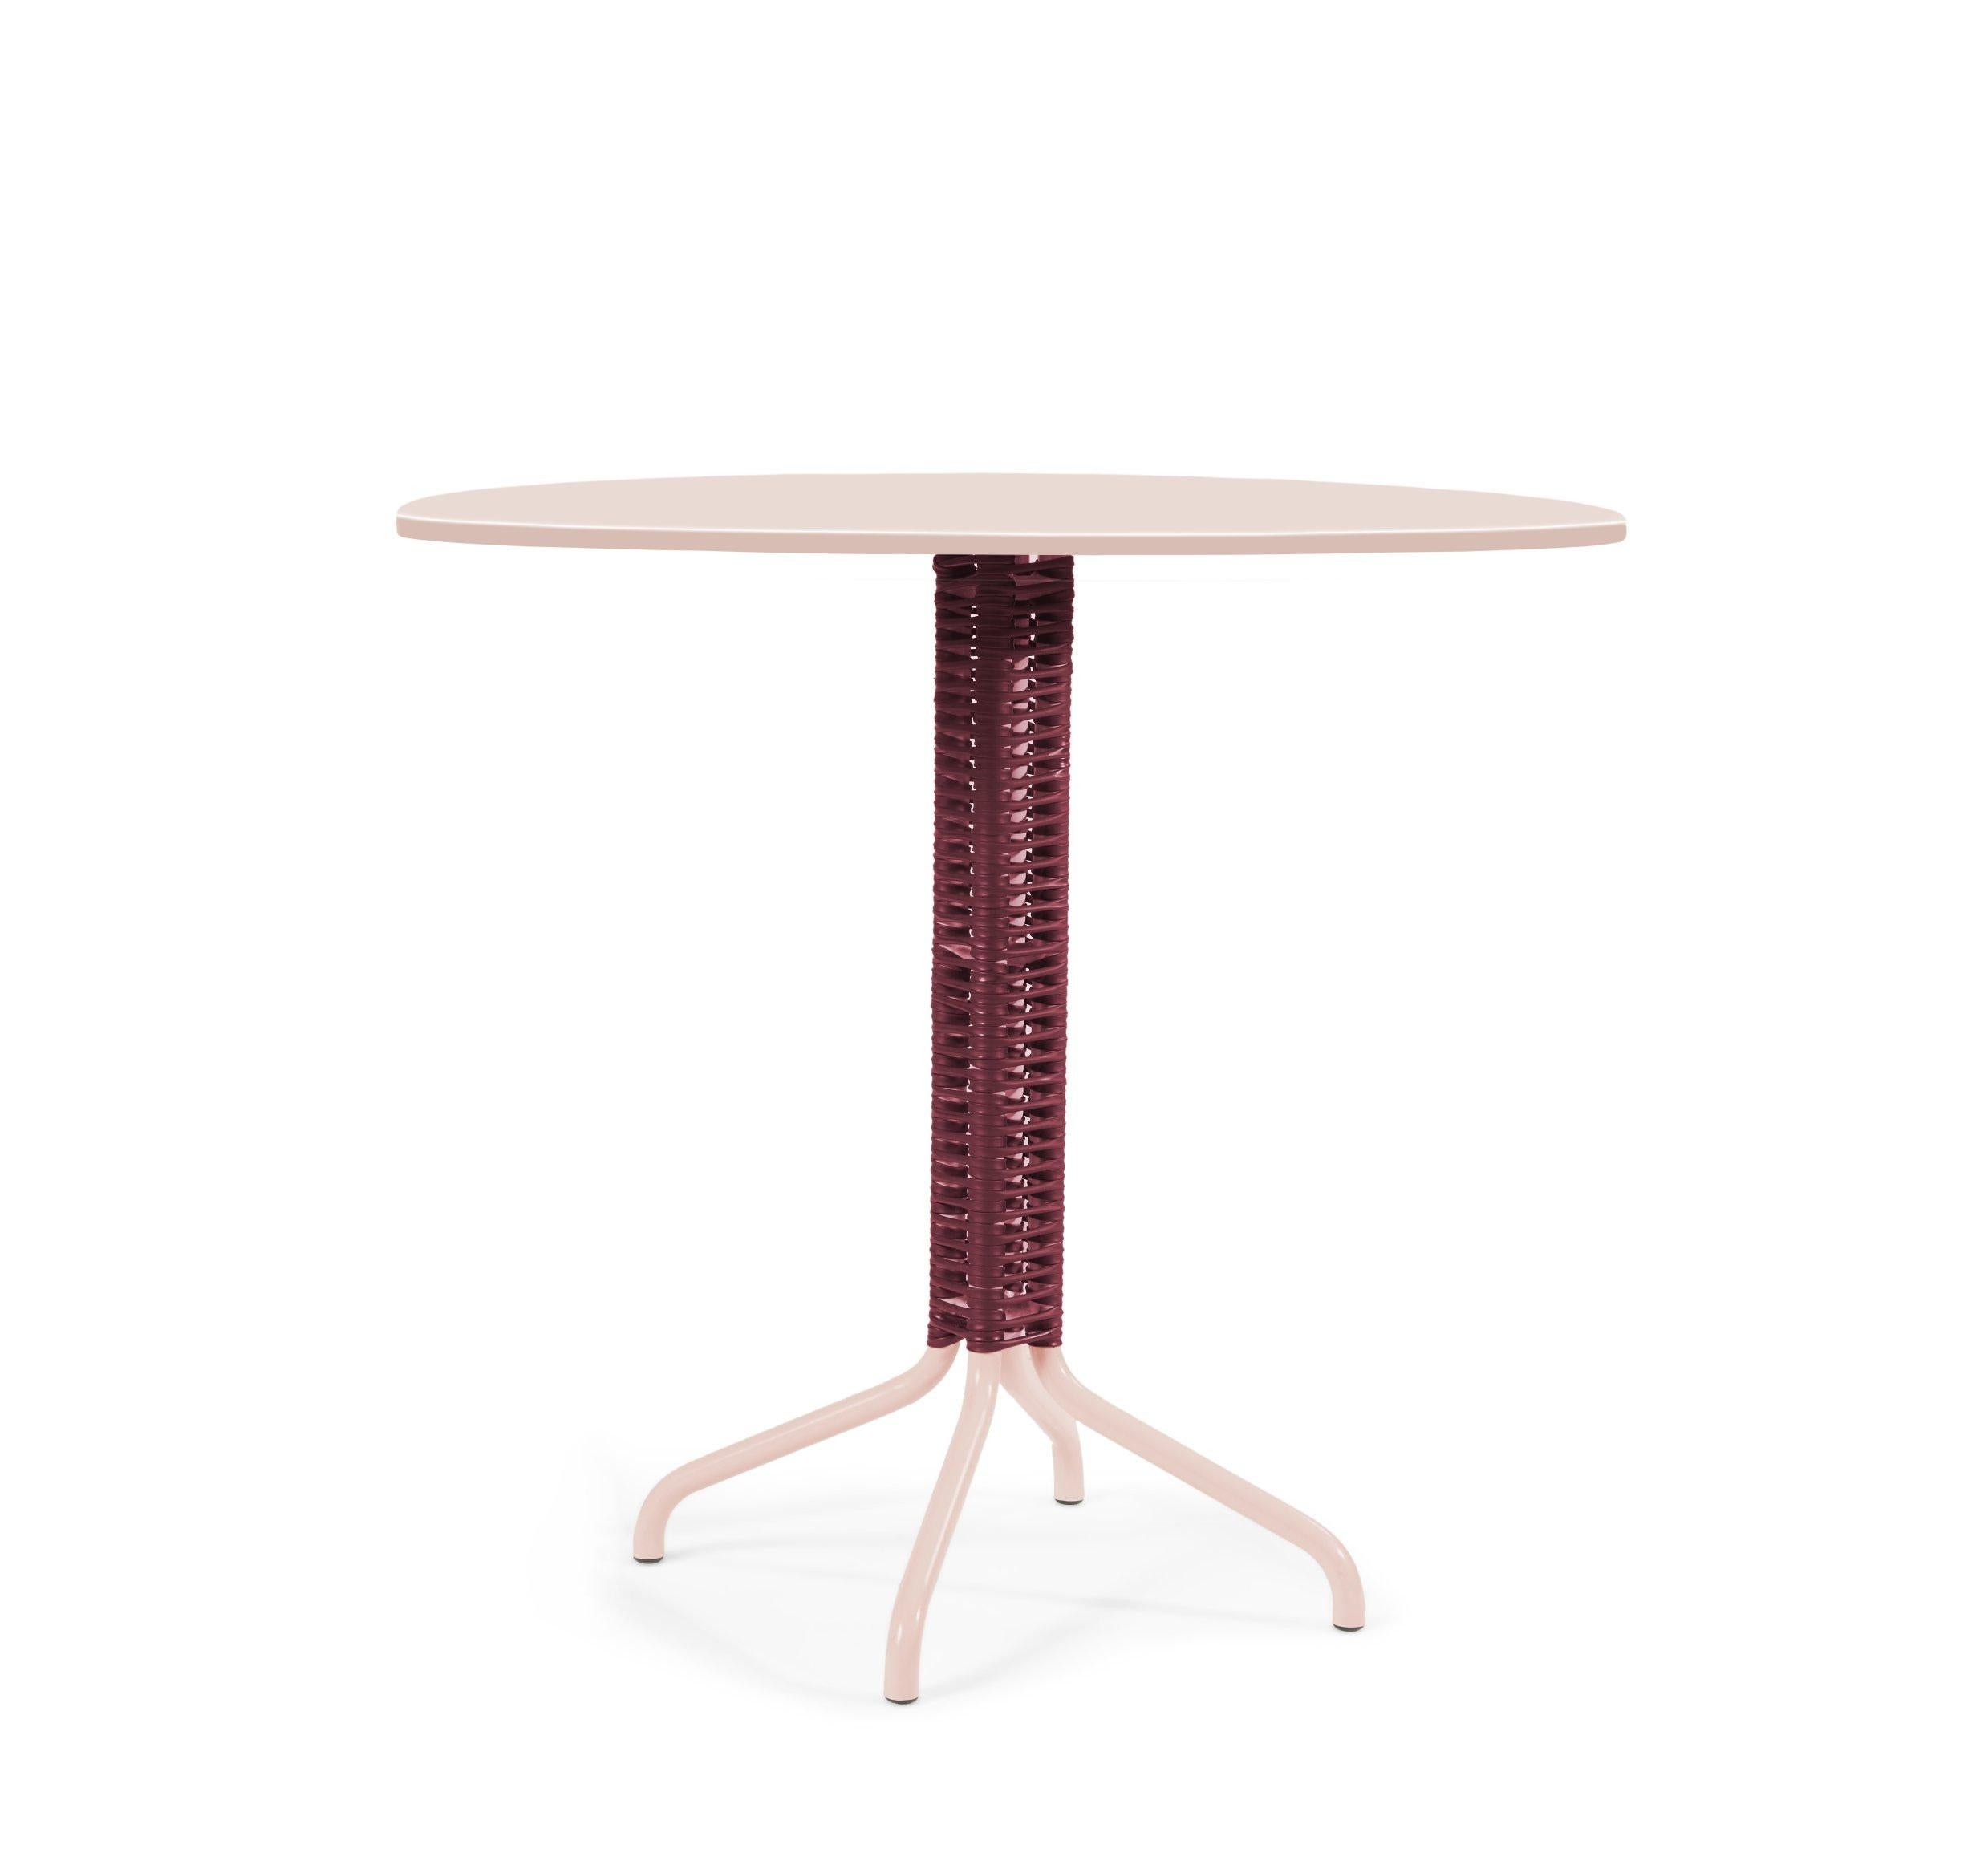 Purple Cielo bistro table by Sebastian Herkner
Dimensions: 60 x 73 x 60 cm
Materials: Steel

The popular cielo collection of chairs, loungers and lounge chairs - designed by Sebastian Herkner - is once again expanding: the elegant bistro table